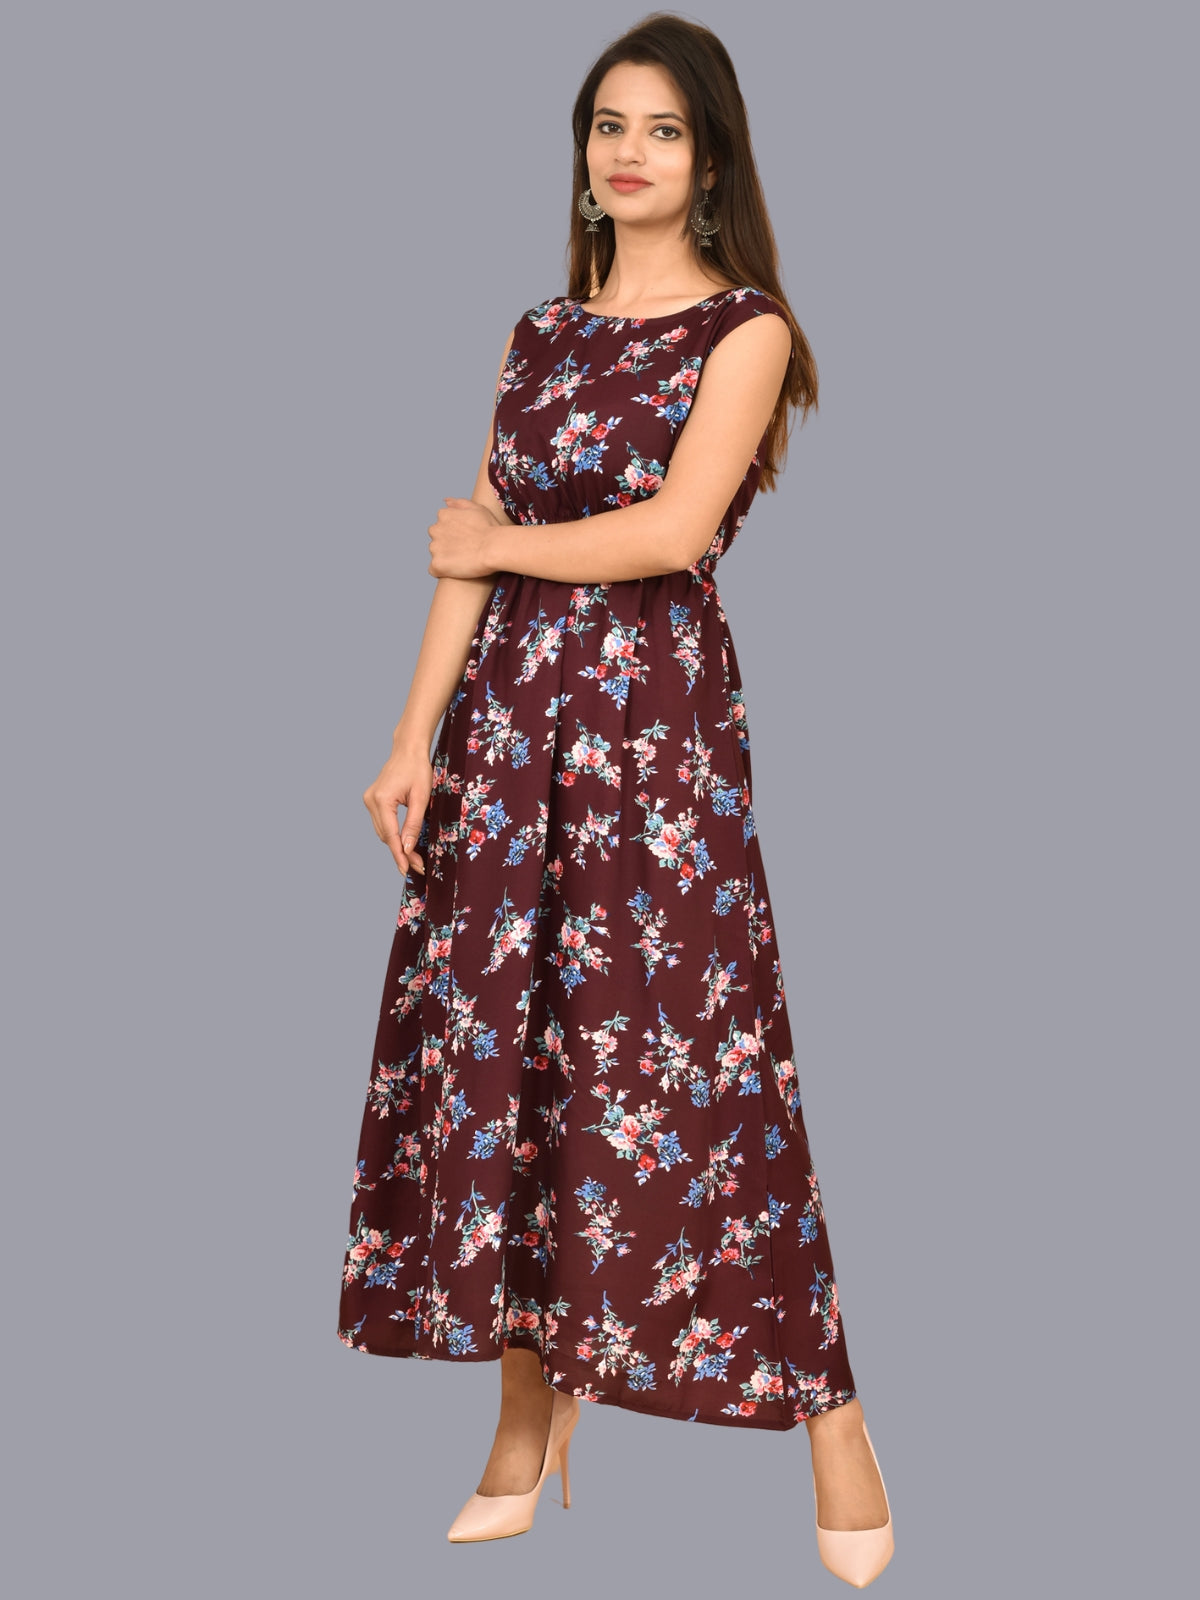 Womens Wine Floral Printed Crepe Fabric Maxi Dress